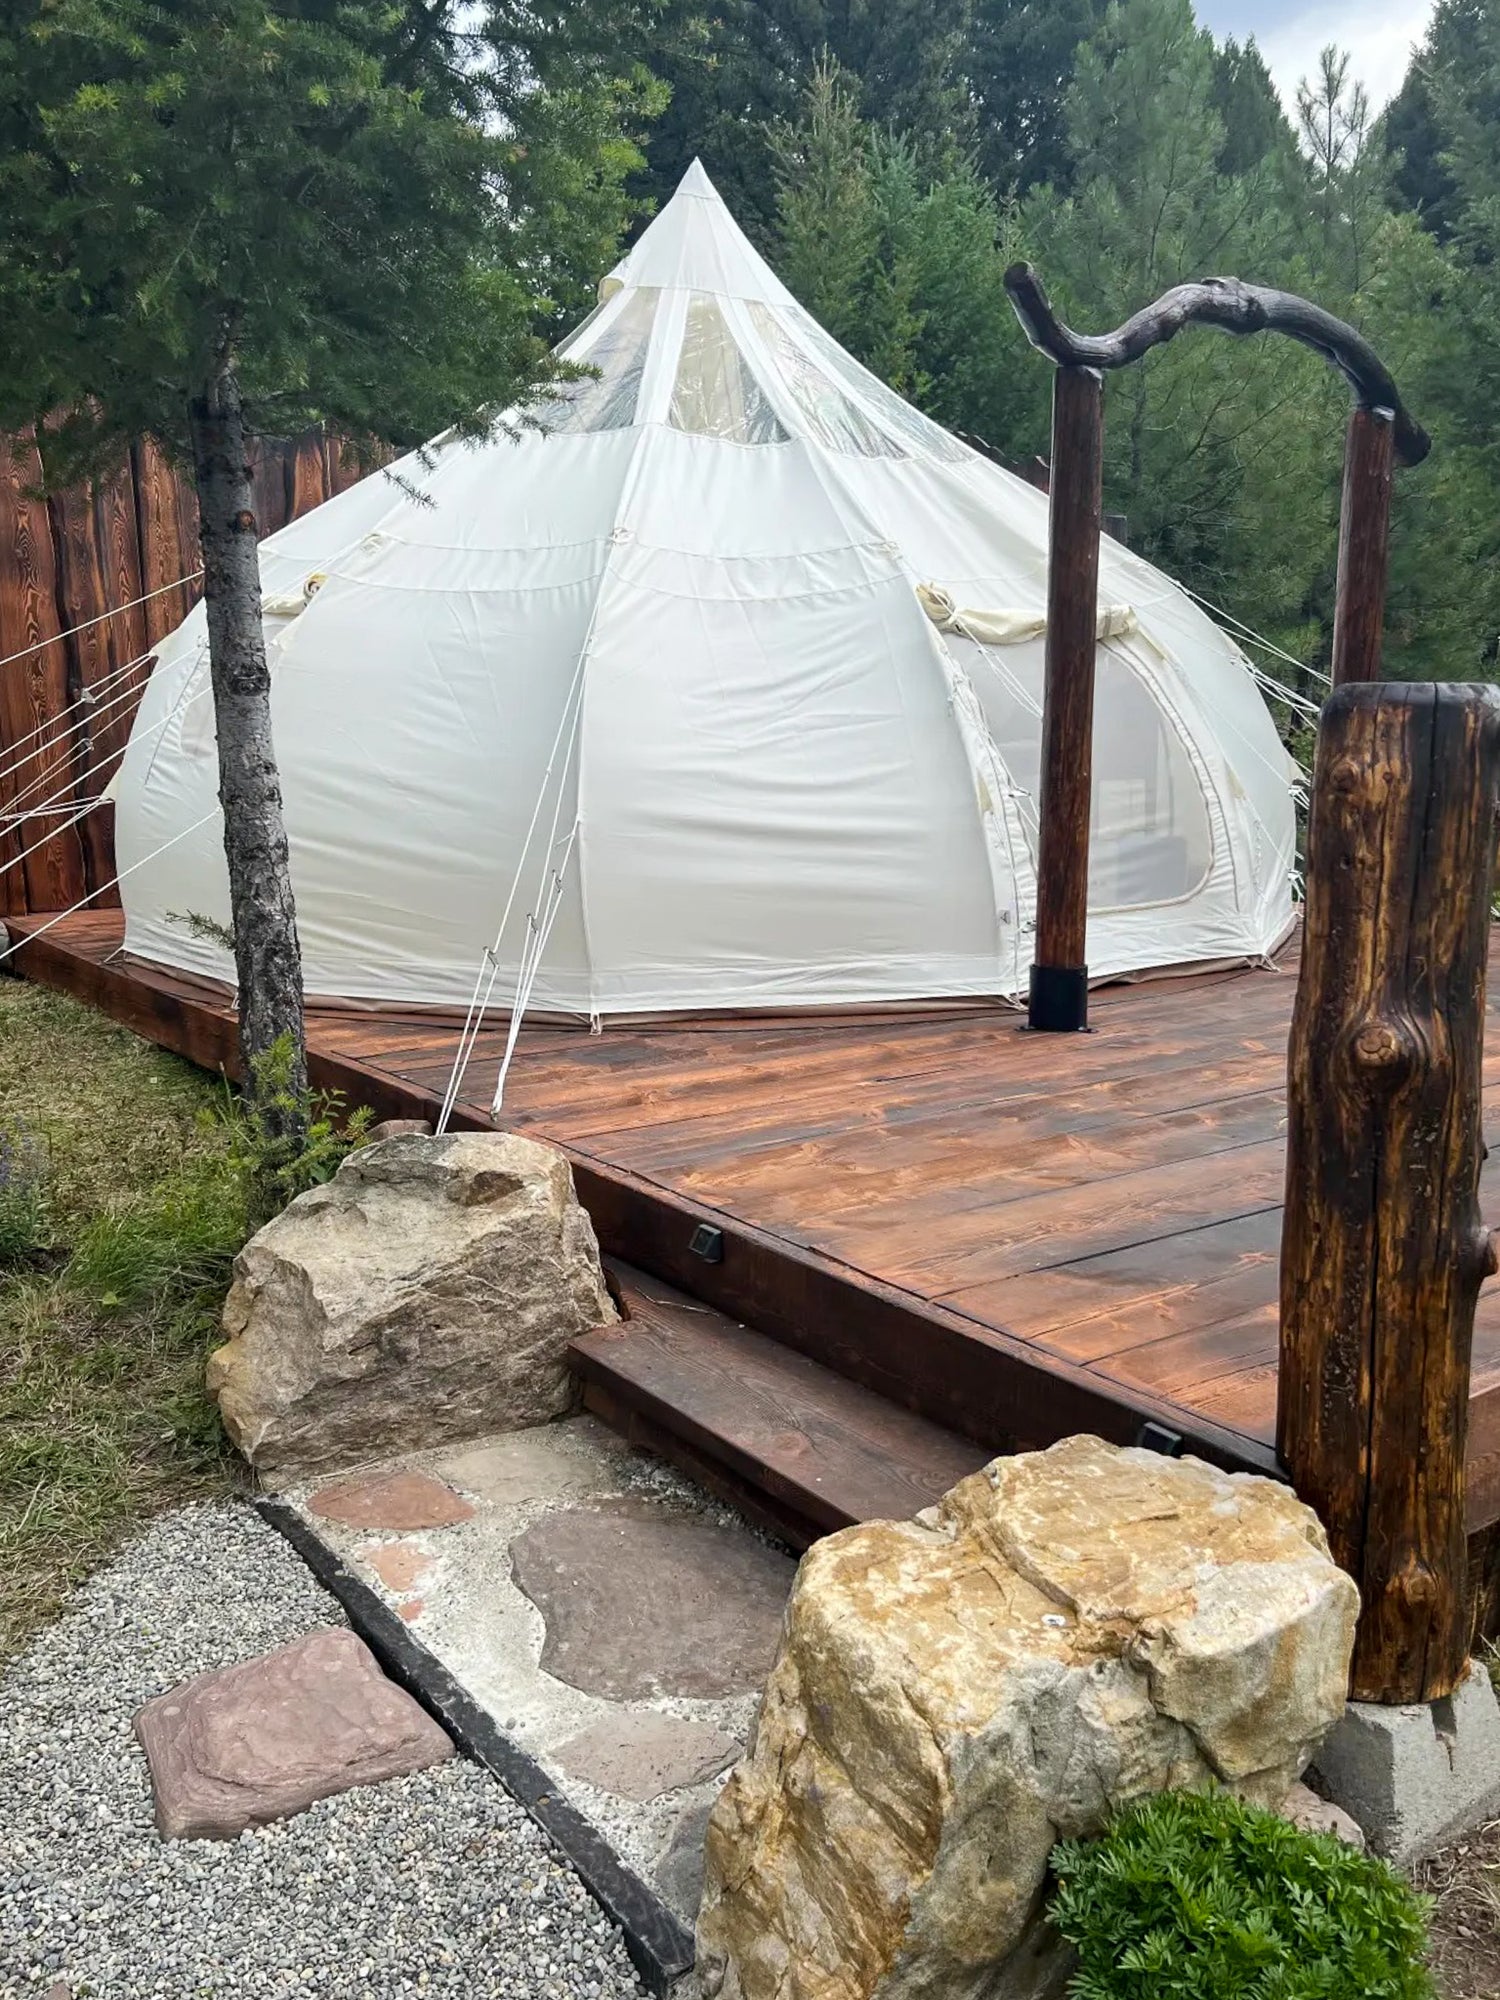 Spectacular glamping tent perched on a scenic cliff edge, harmonizing breathtaking views with unmatched indoor luxuries.